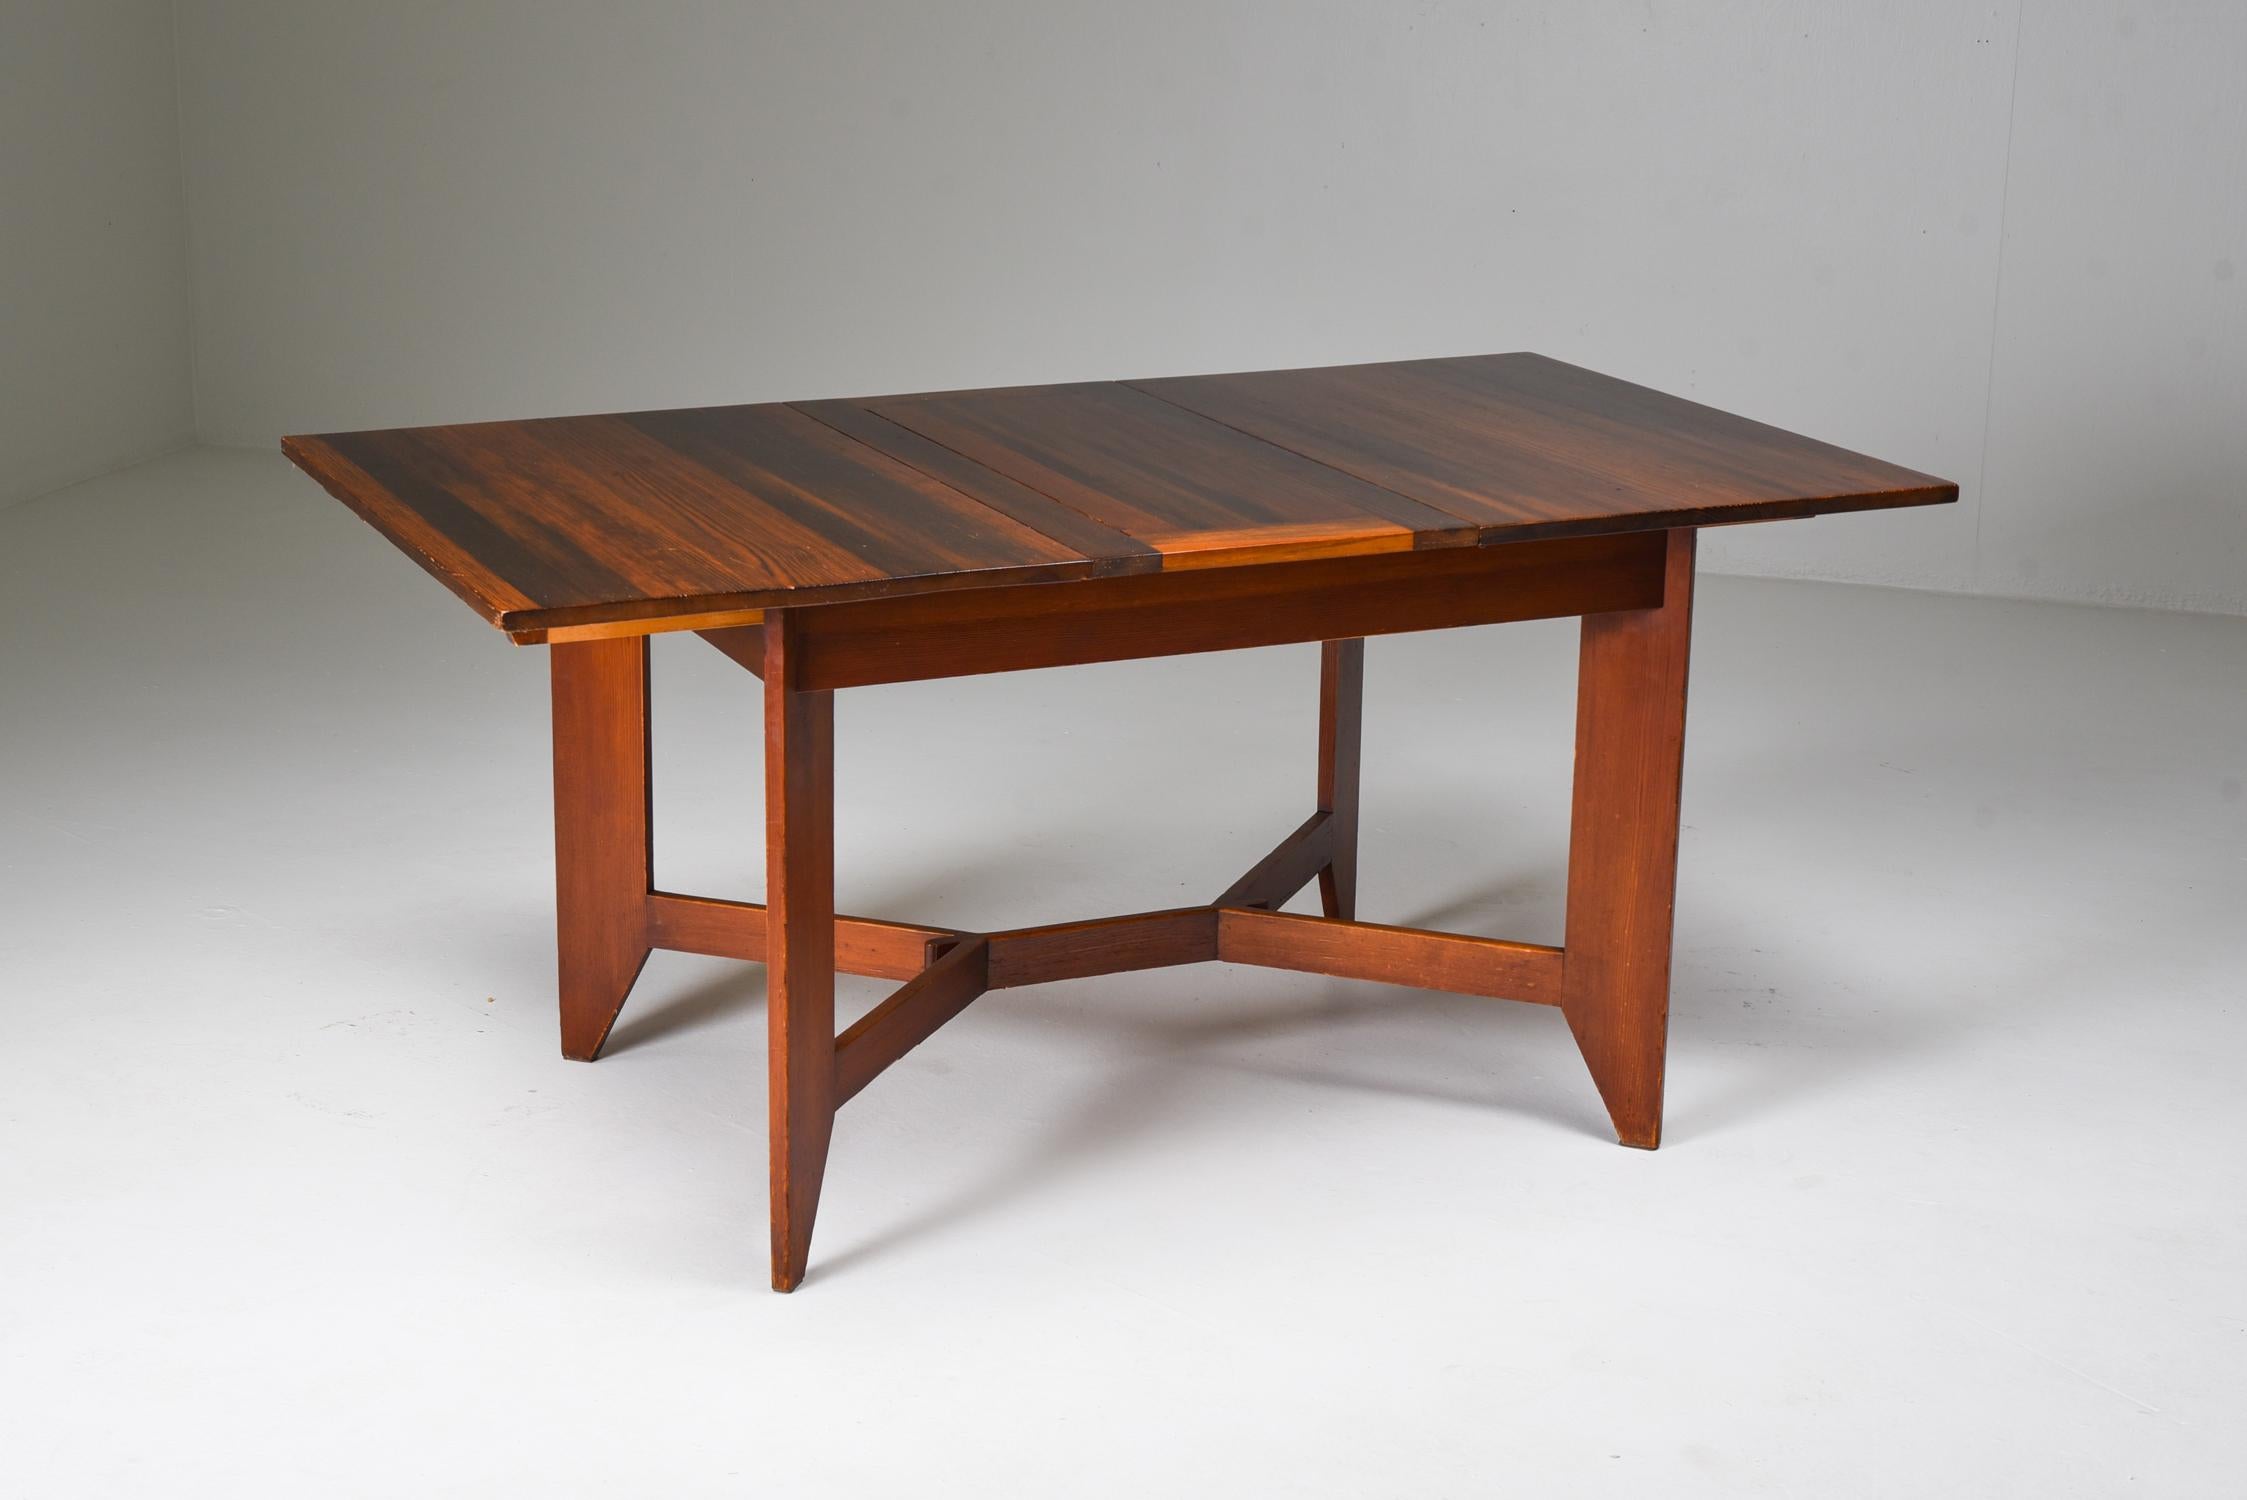 Dutch Modernist Dining Table by H. Wouda